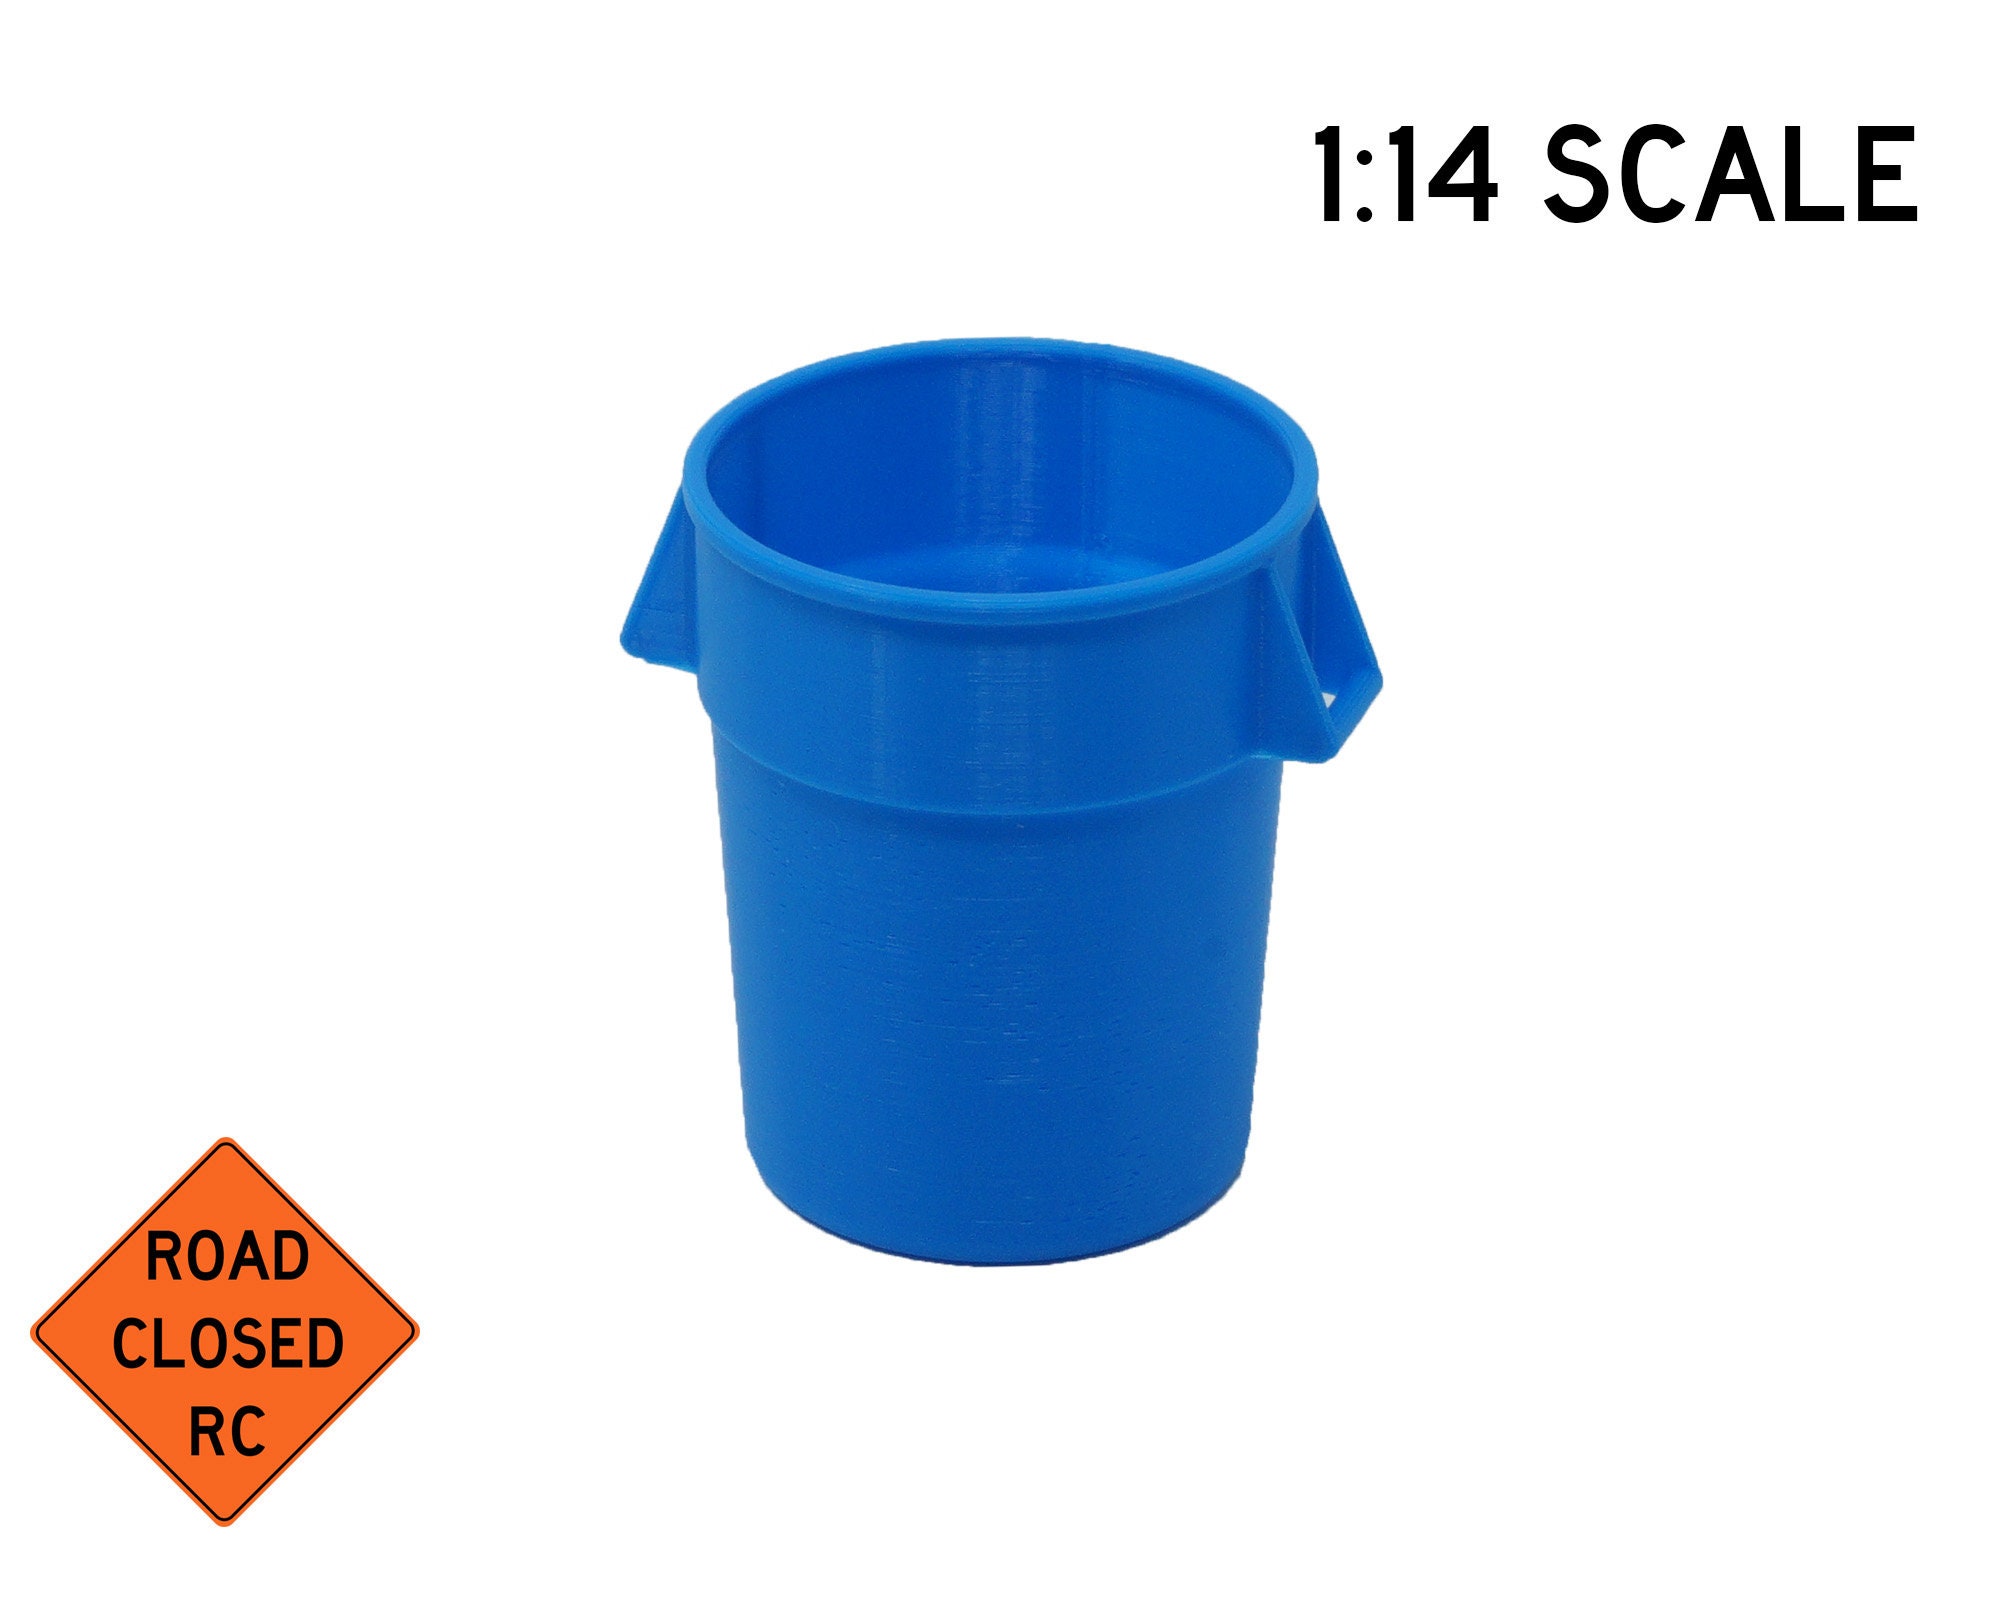 1:12 Scale Metal Trash Can with Lid – Mini Materials